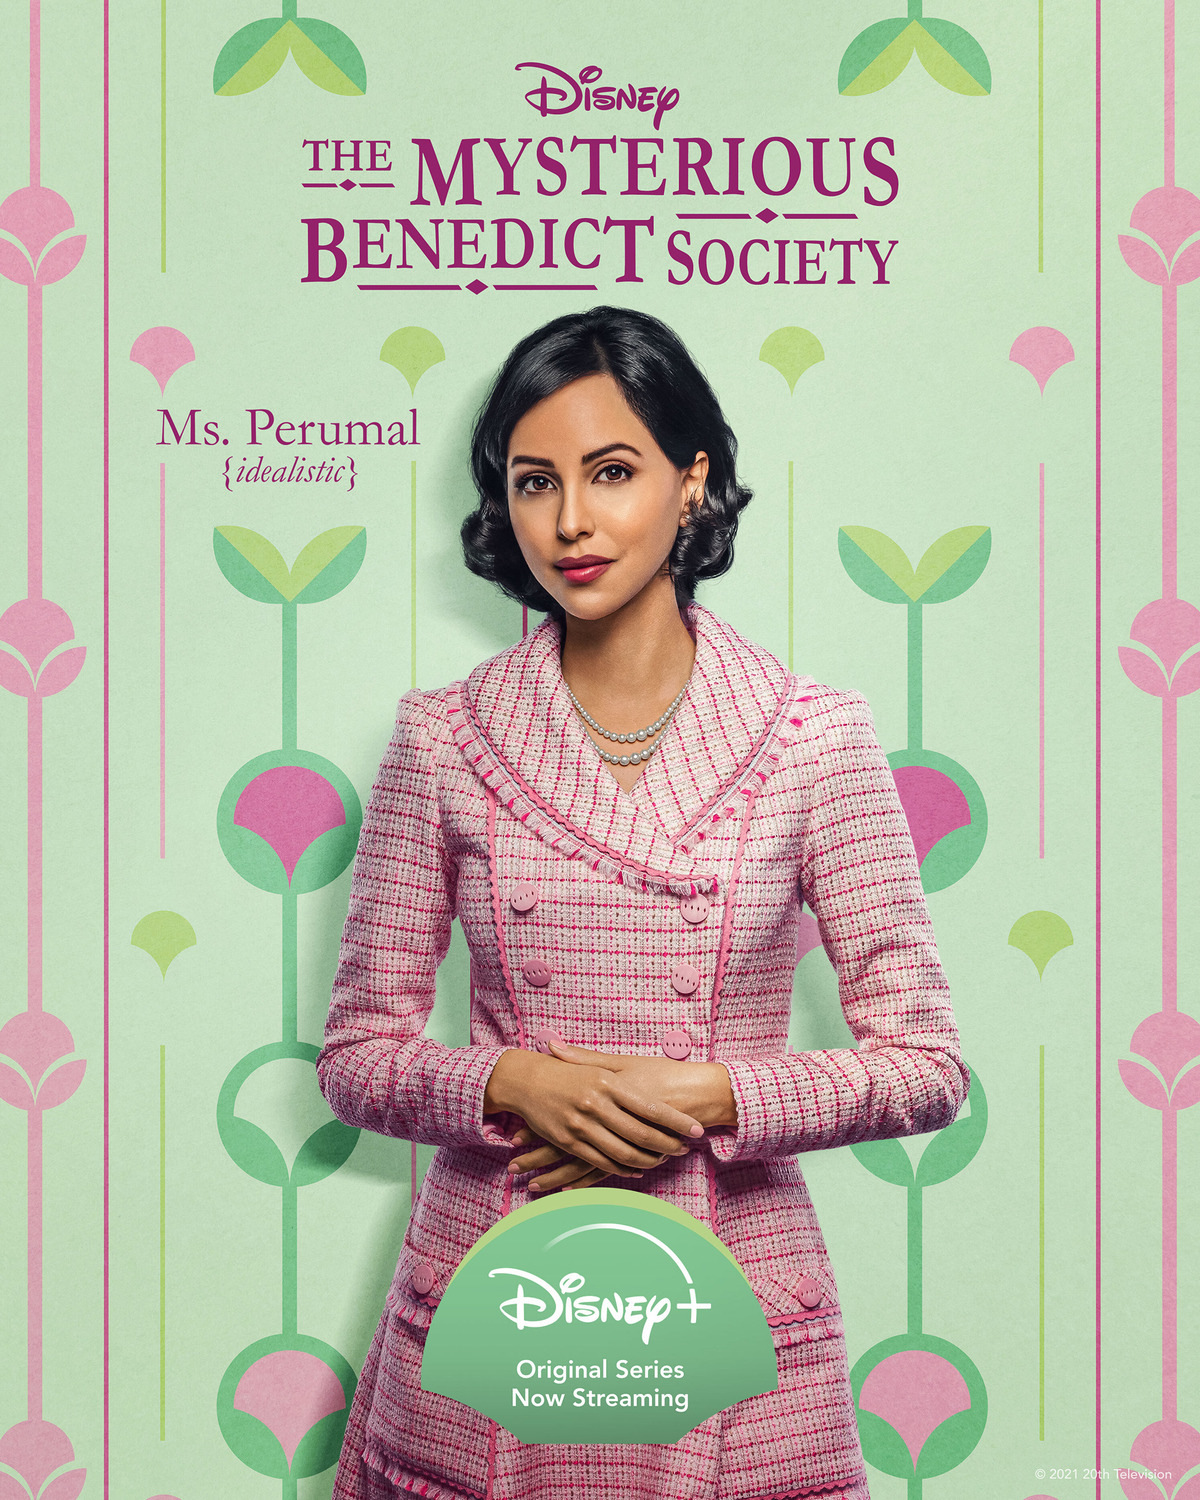 Extra Large TV Poster Image for The Mysterious Benedict Society (#11 of 11)